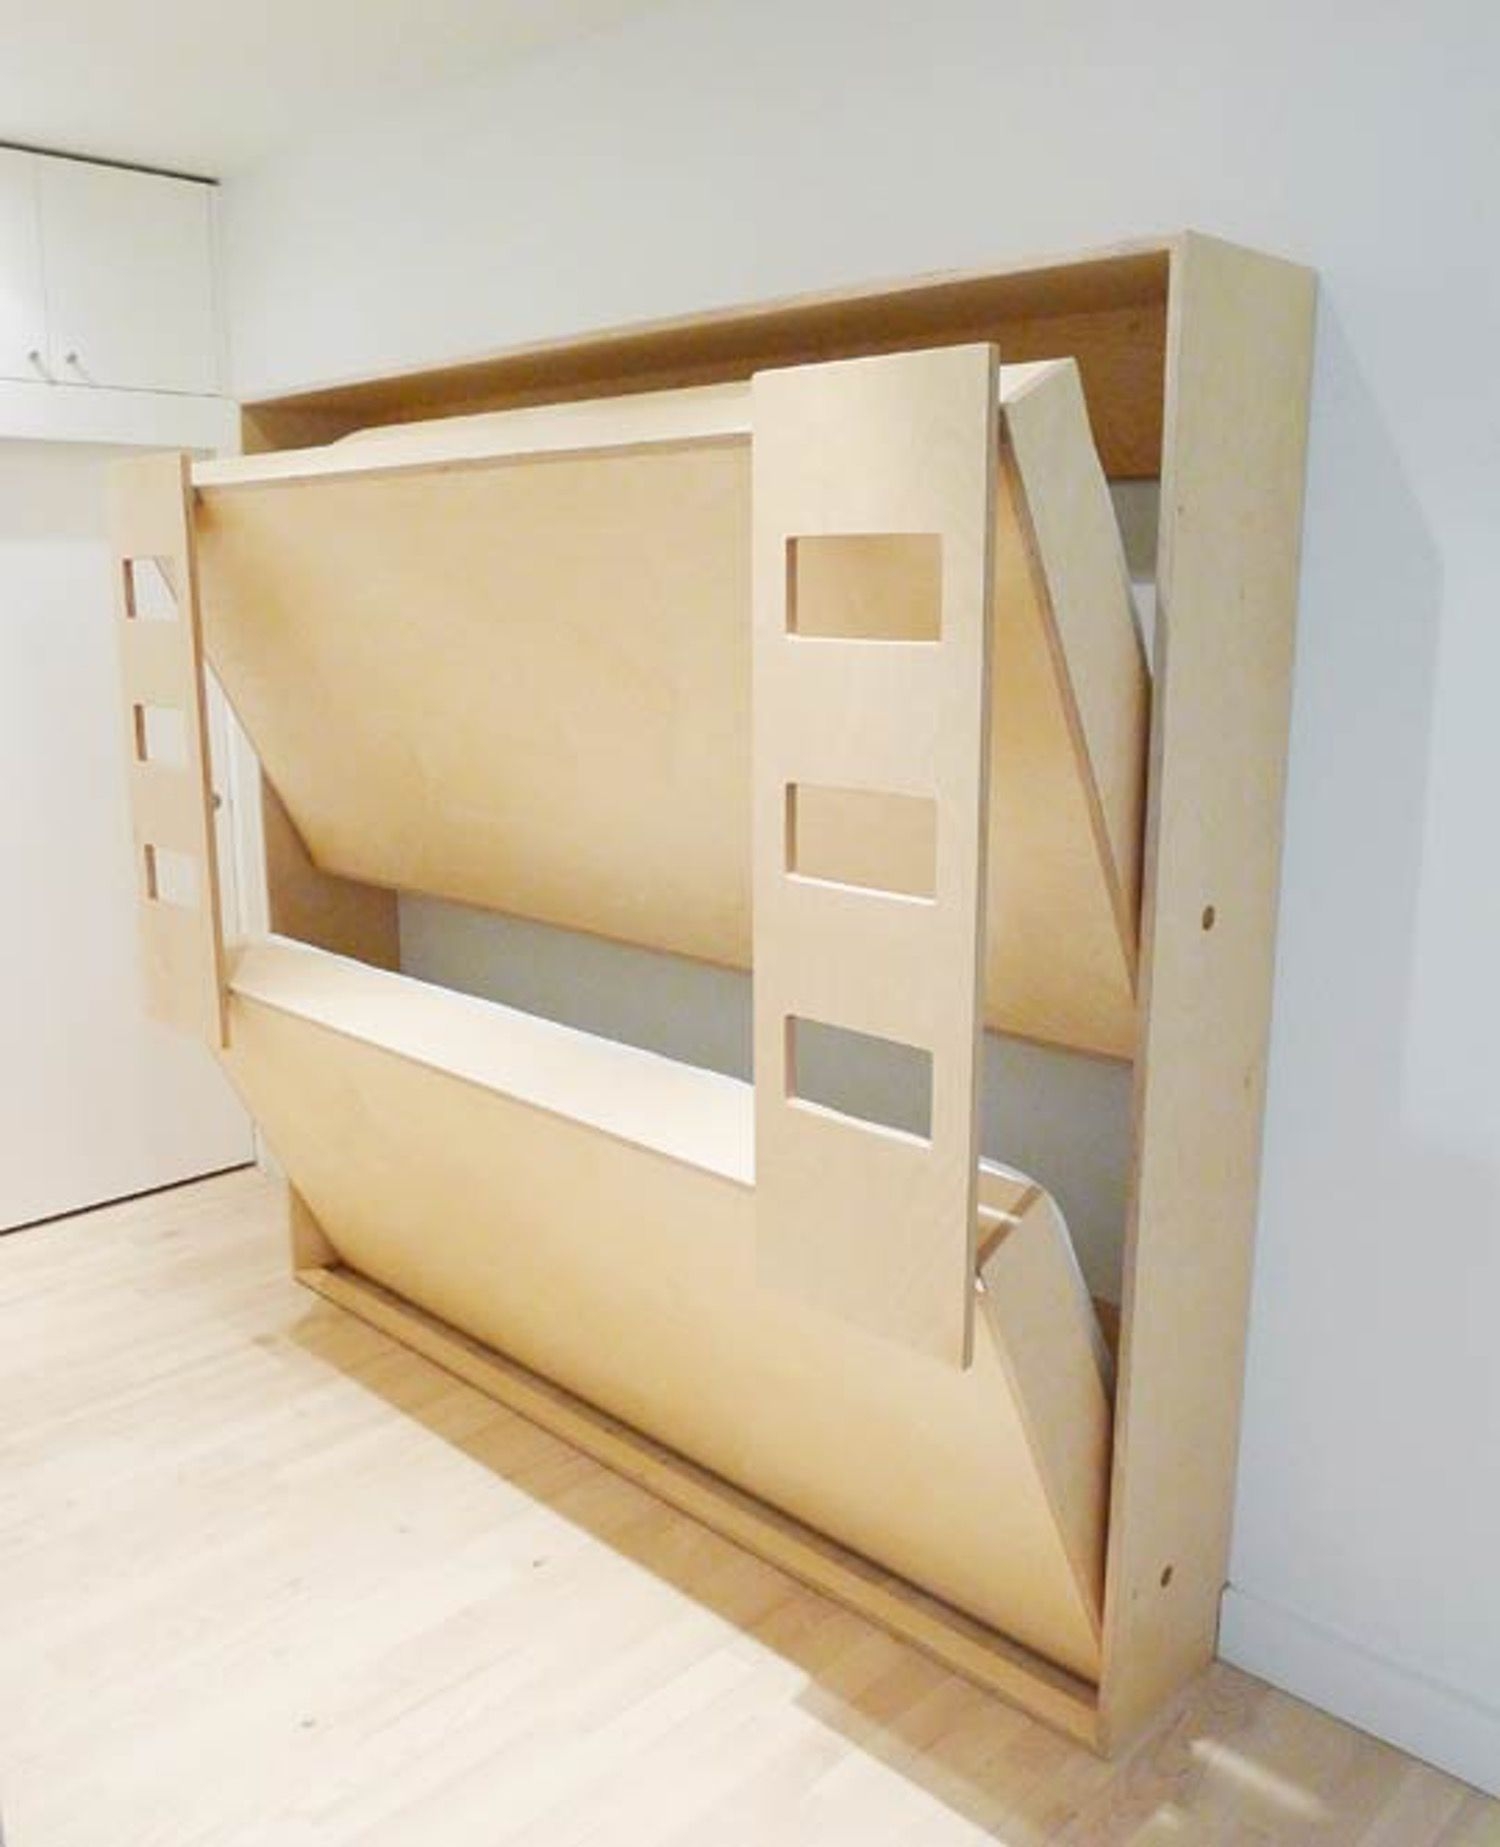 childrens space saving beds